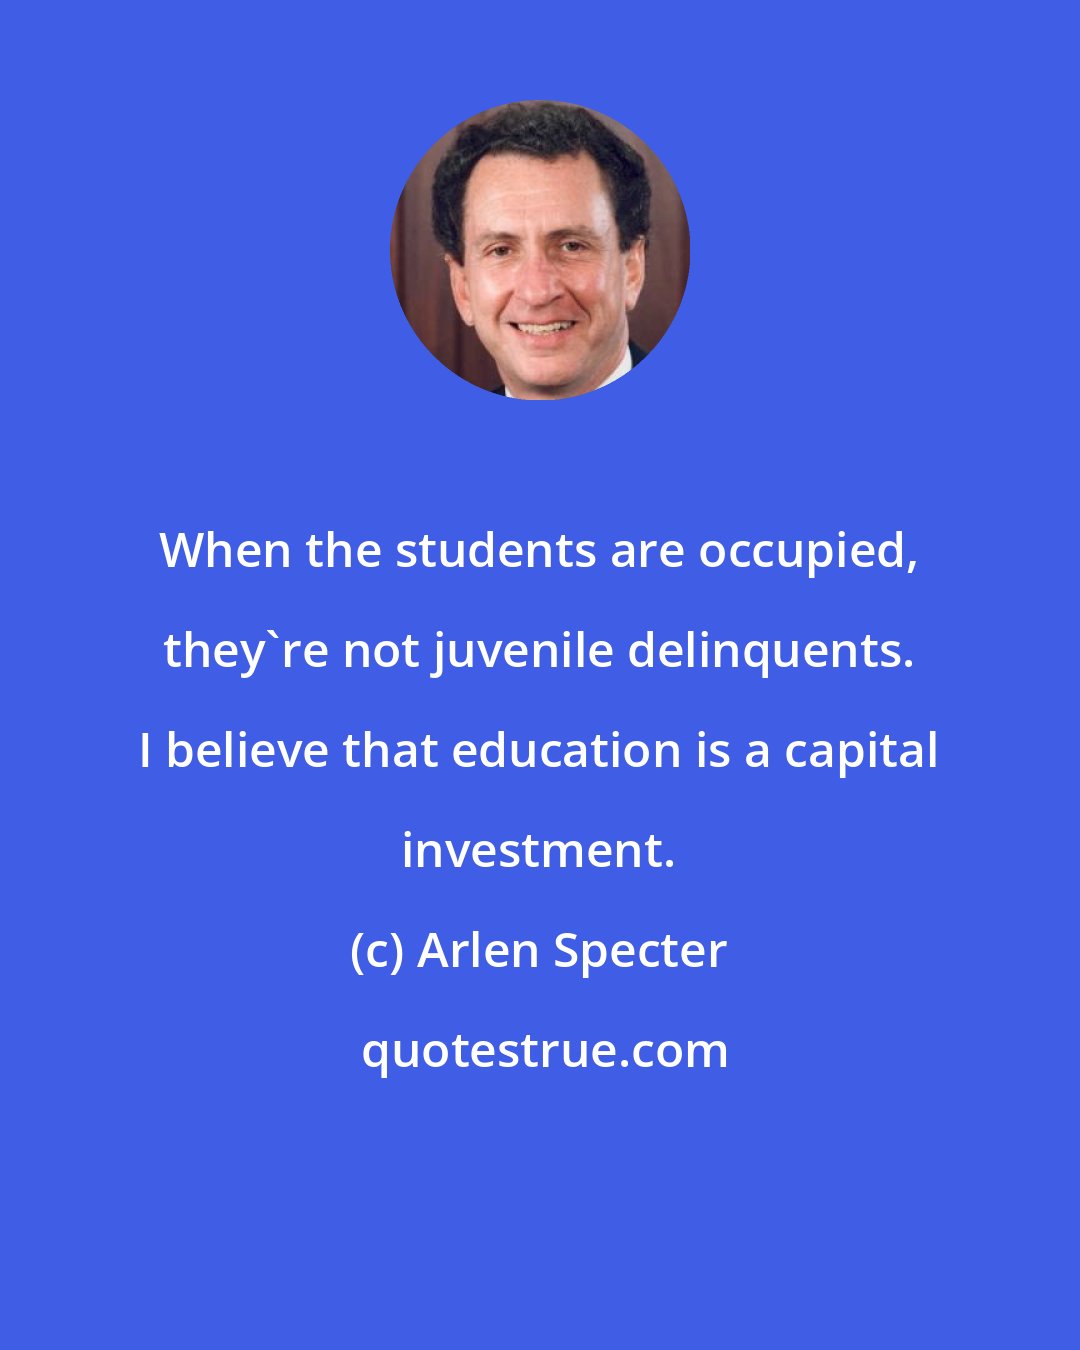 Arlen Specter: When the students are occupied, they're not juvenile delinquents. I believe that education is a capital investment.